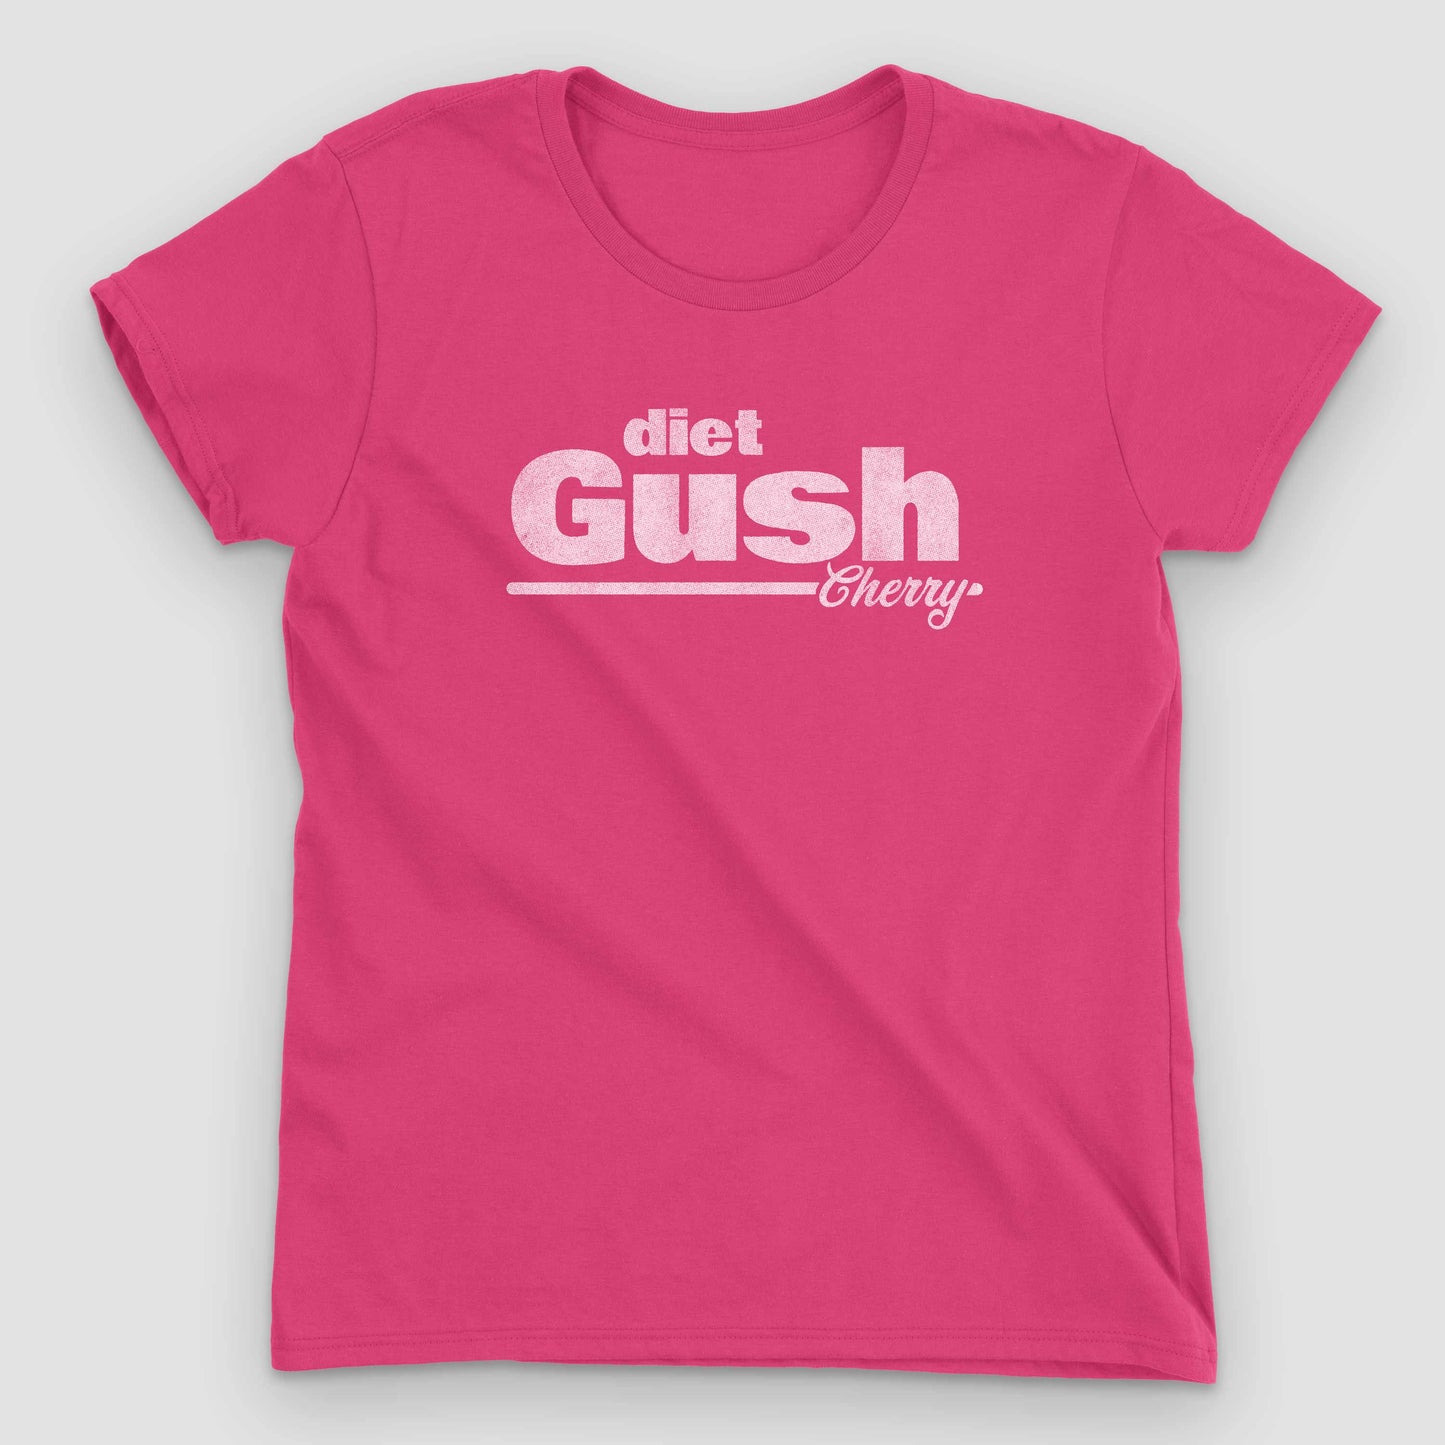 Hot Pink Diet Gush Cherry Soda Women's Graphic T-Shirt by Snaxtime